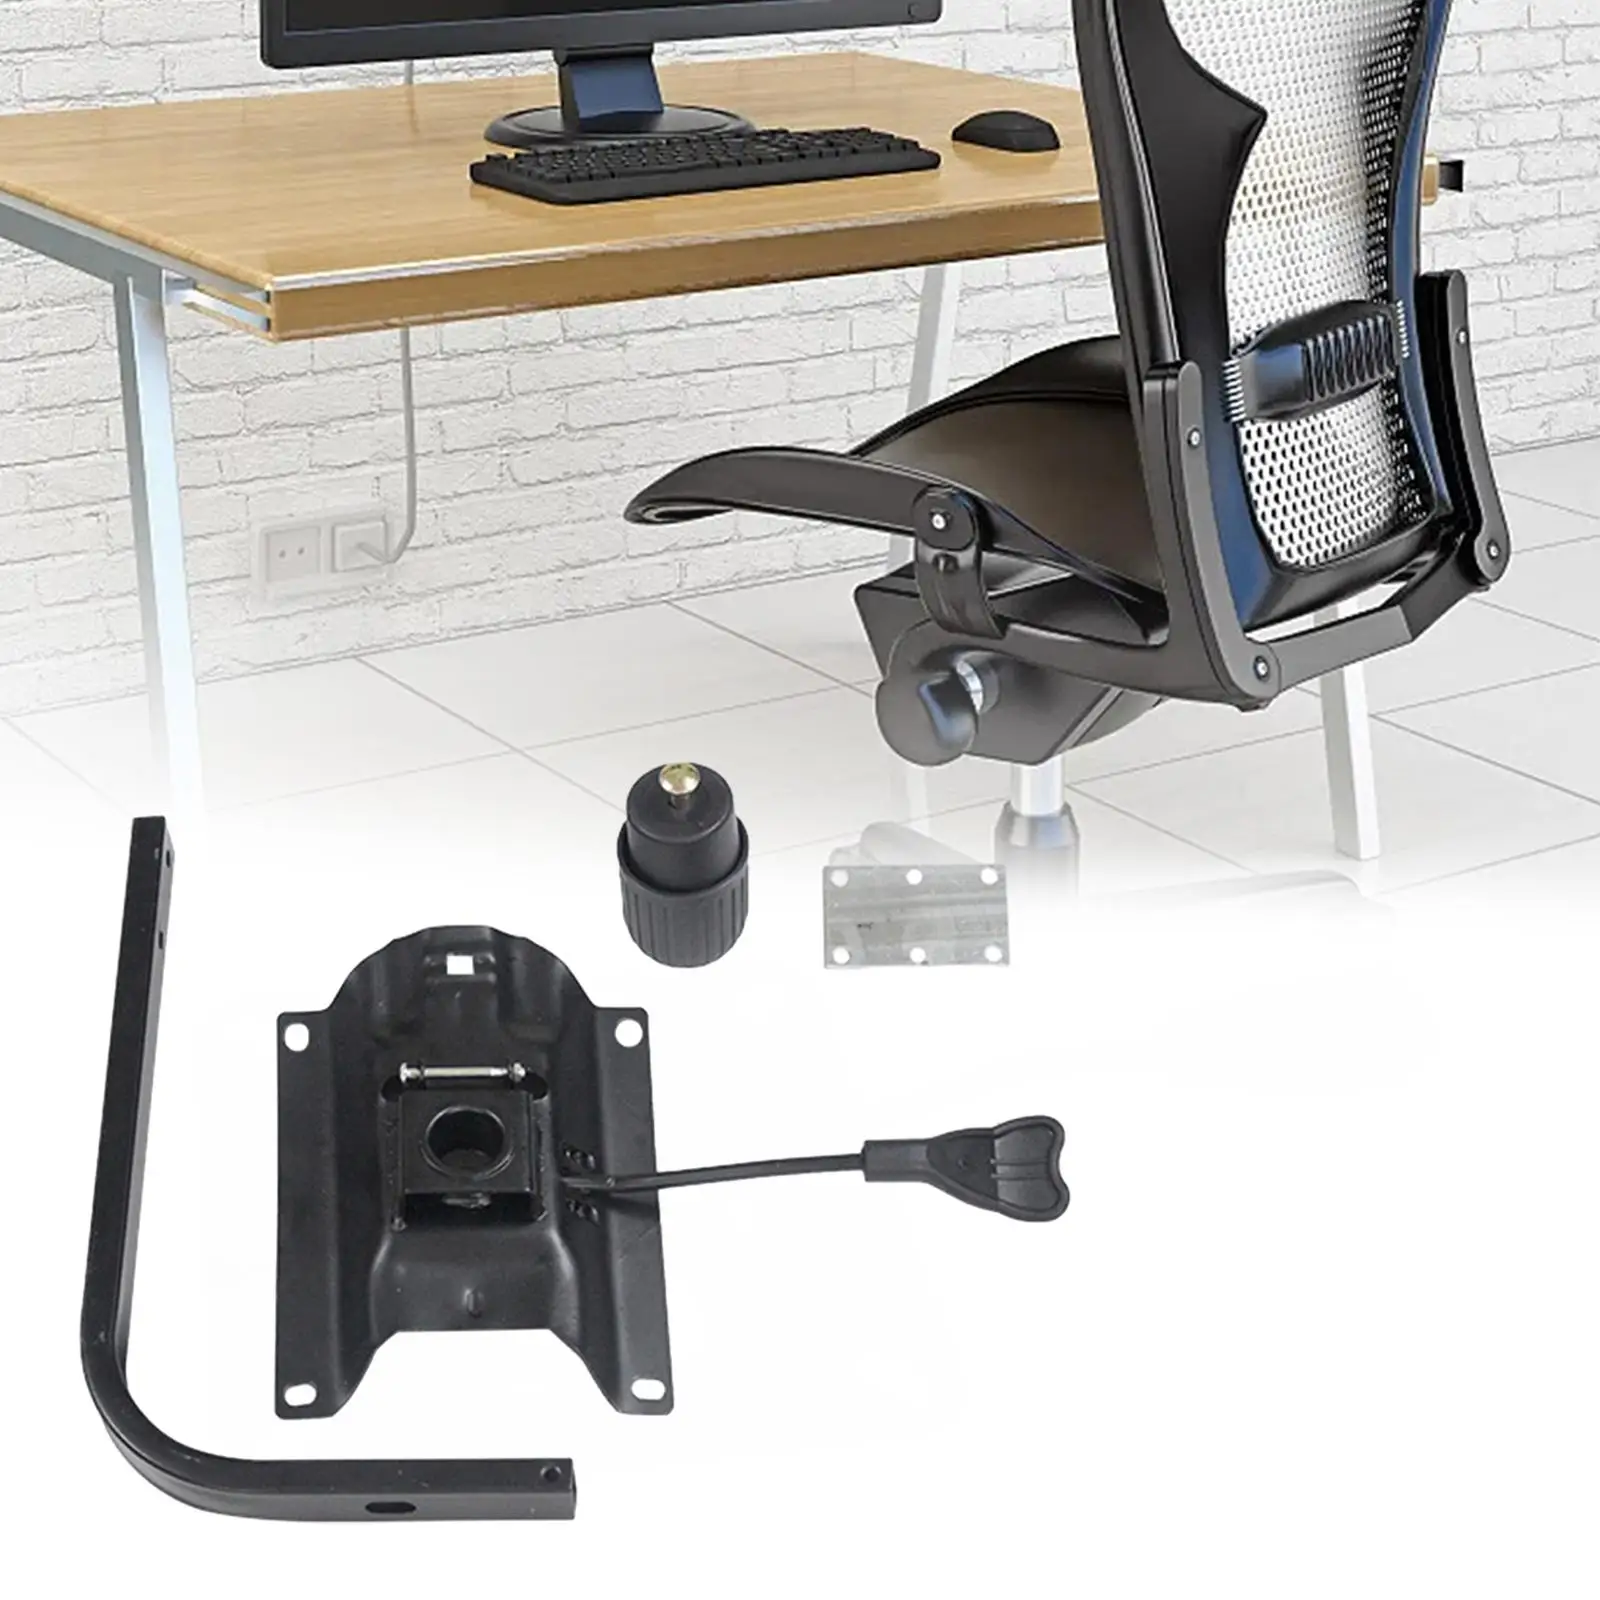 Replacement Swivel Tilt Control for Office Chair Heavy Duty Desk Chair Seat Tilt Control Chassis for Home Computer Swivel Chairs